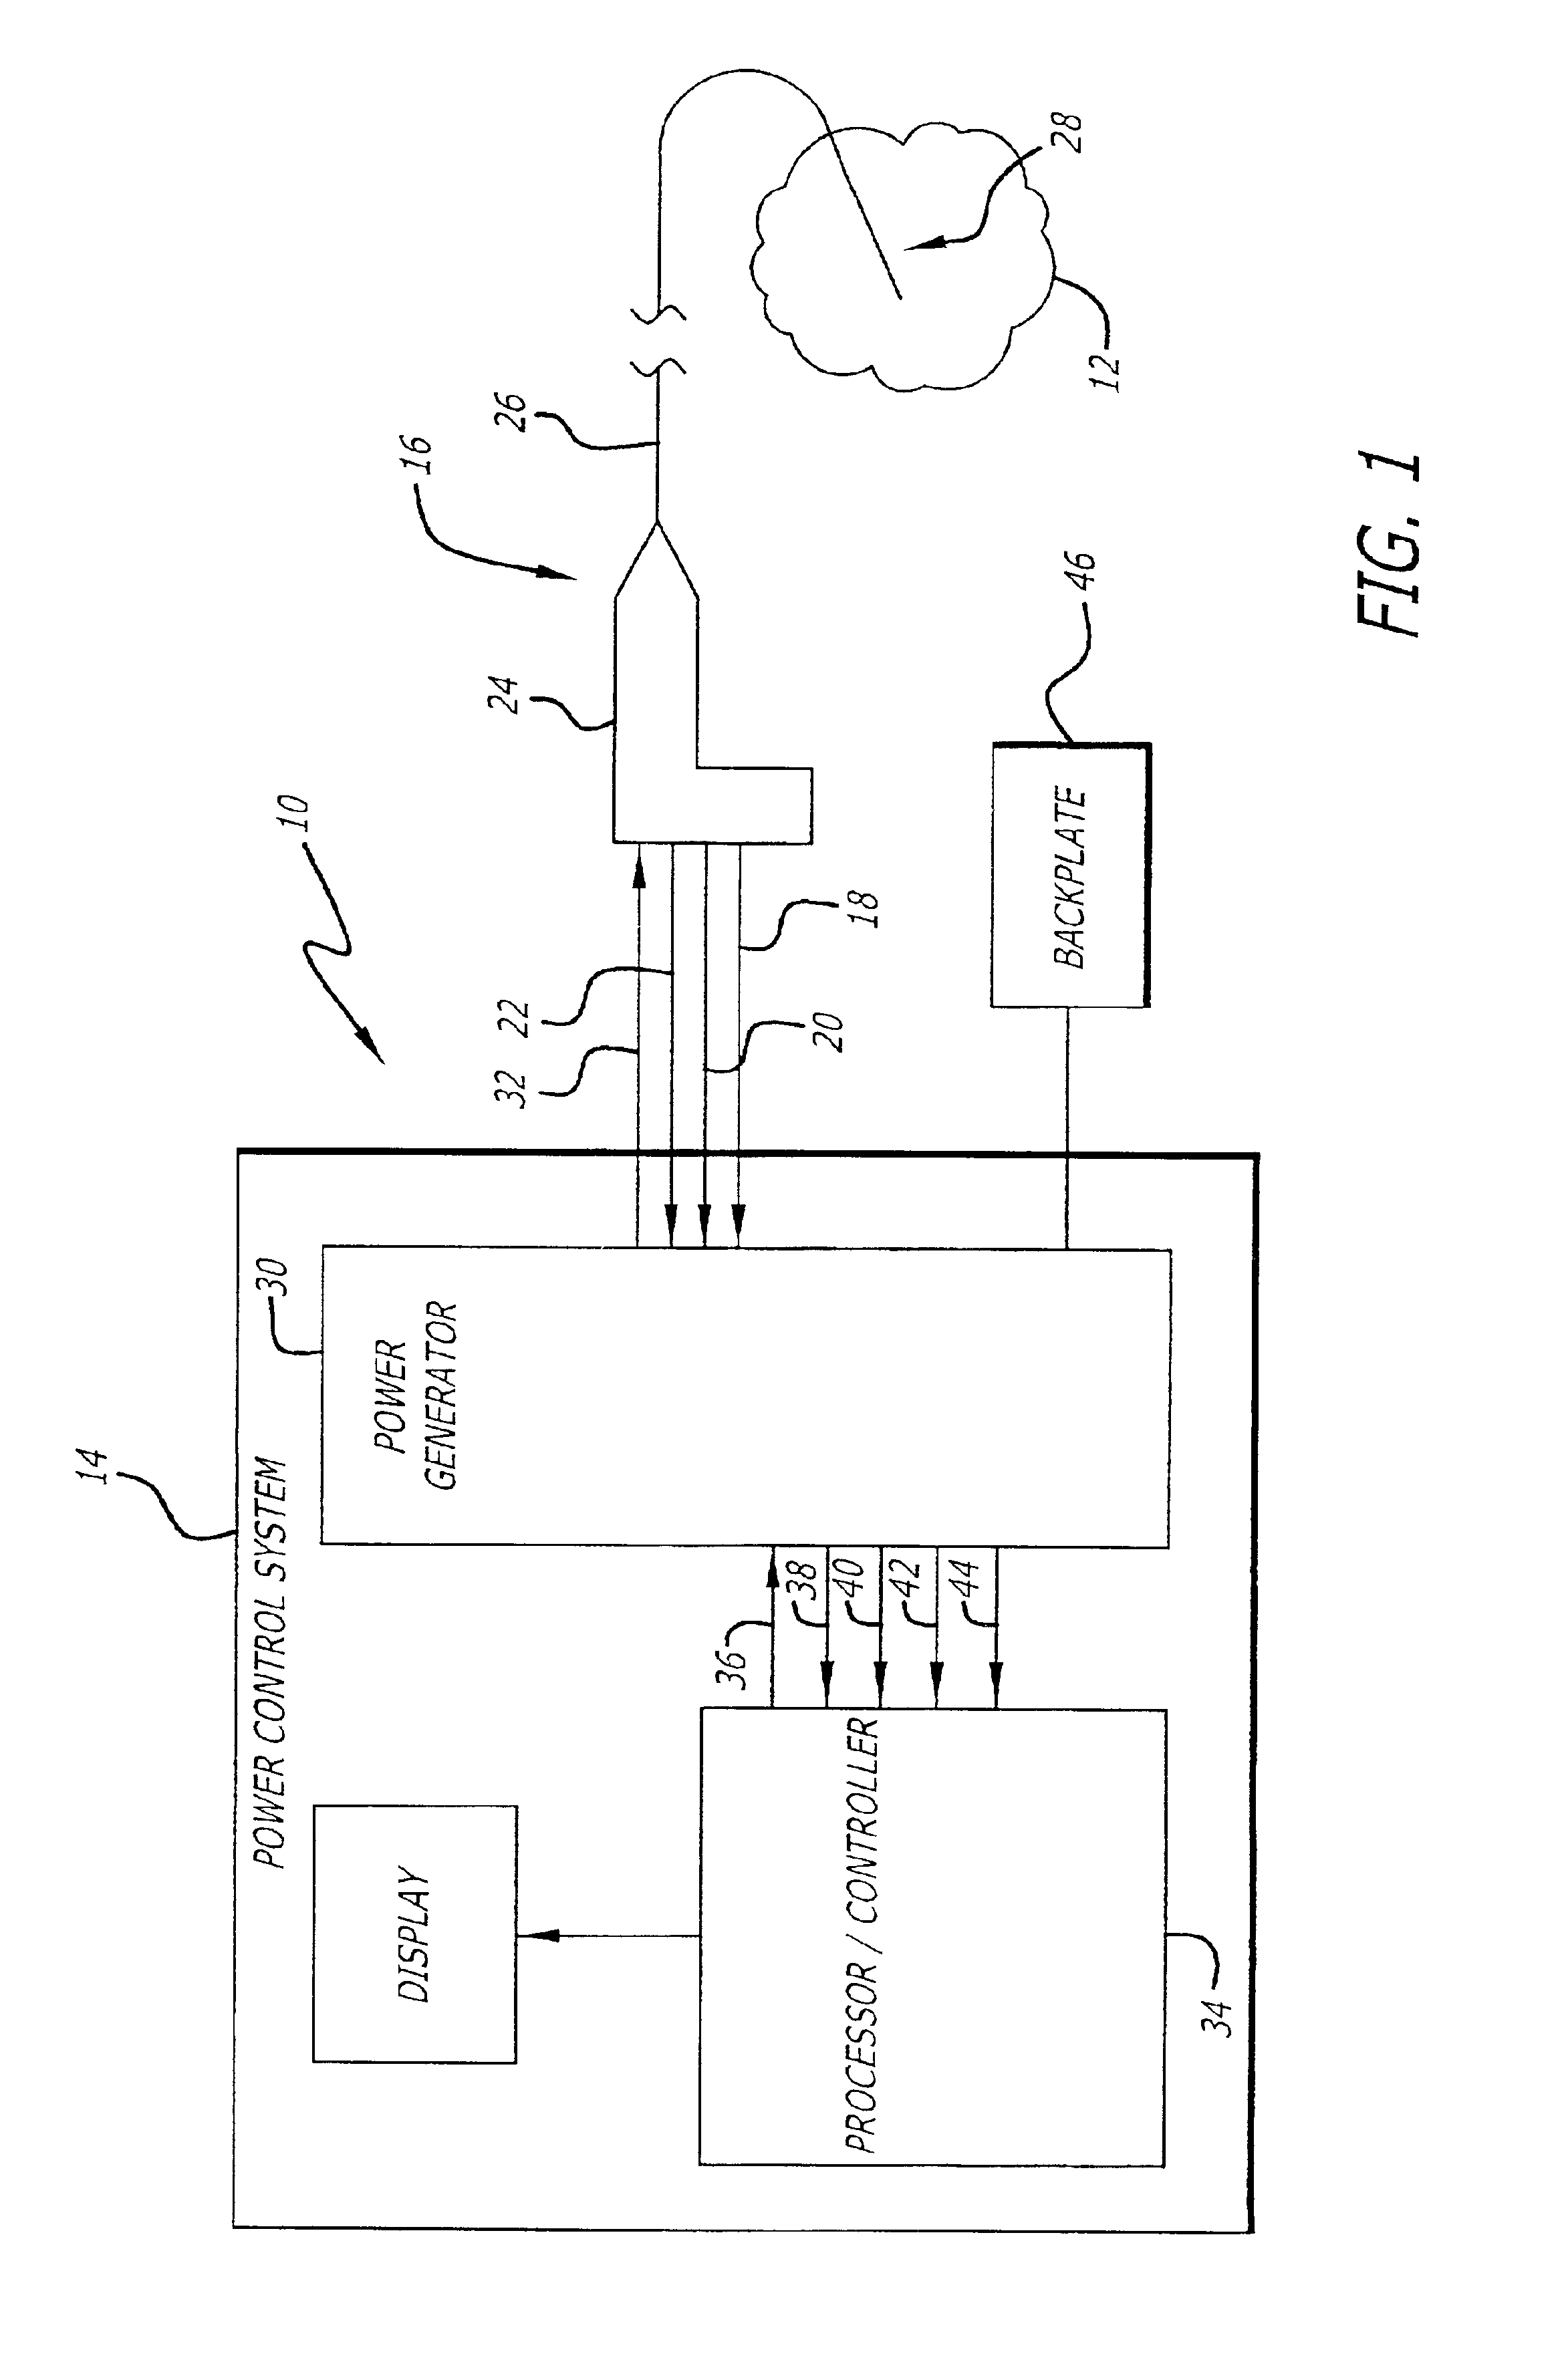 Ablation catheter with transducer for providing one or more of pressure, temperature and fluid flow data for use in controlling ablation therapy